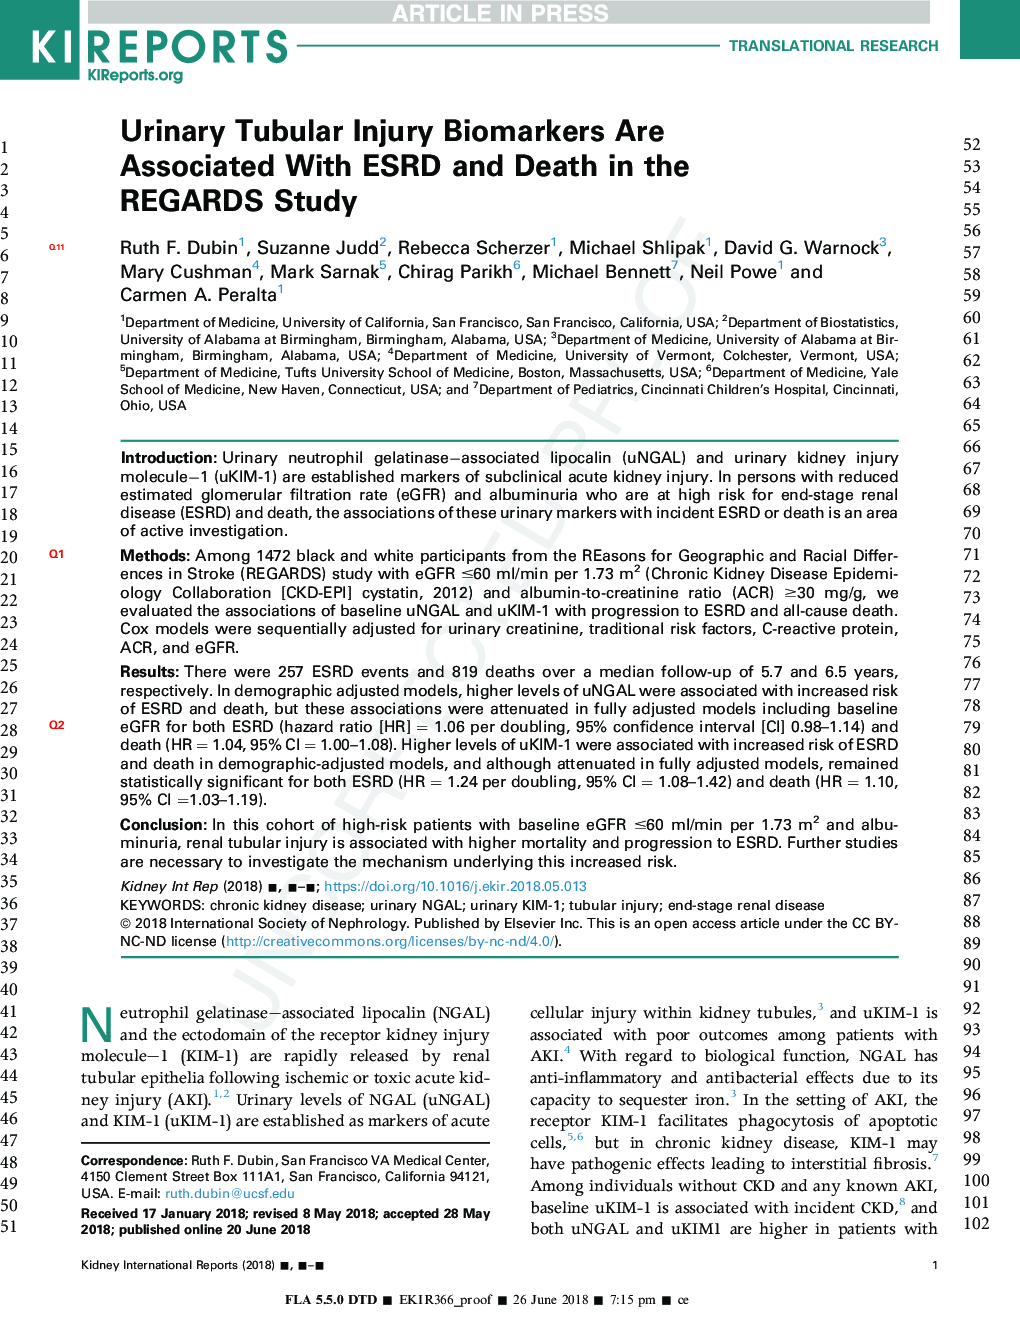 Urinary Tubular Injury Biomarkers Are Associated With ESRD and Death in the REGARDS Study